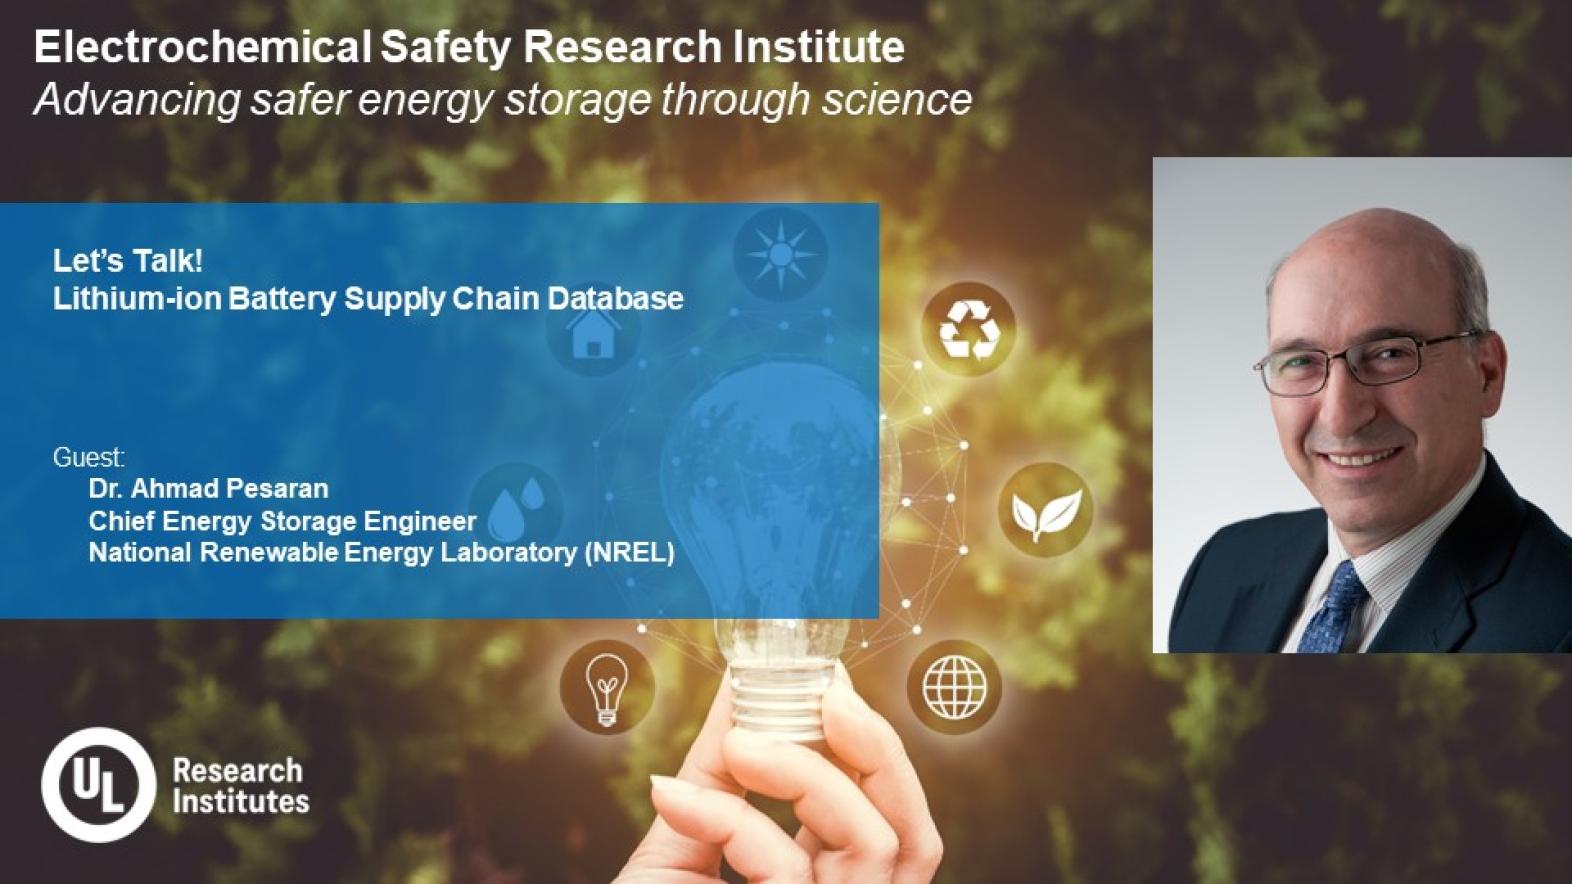 Lithium-Ion Battery Supply Chain Database, with Dr. Ahmad Pesaran